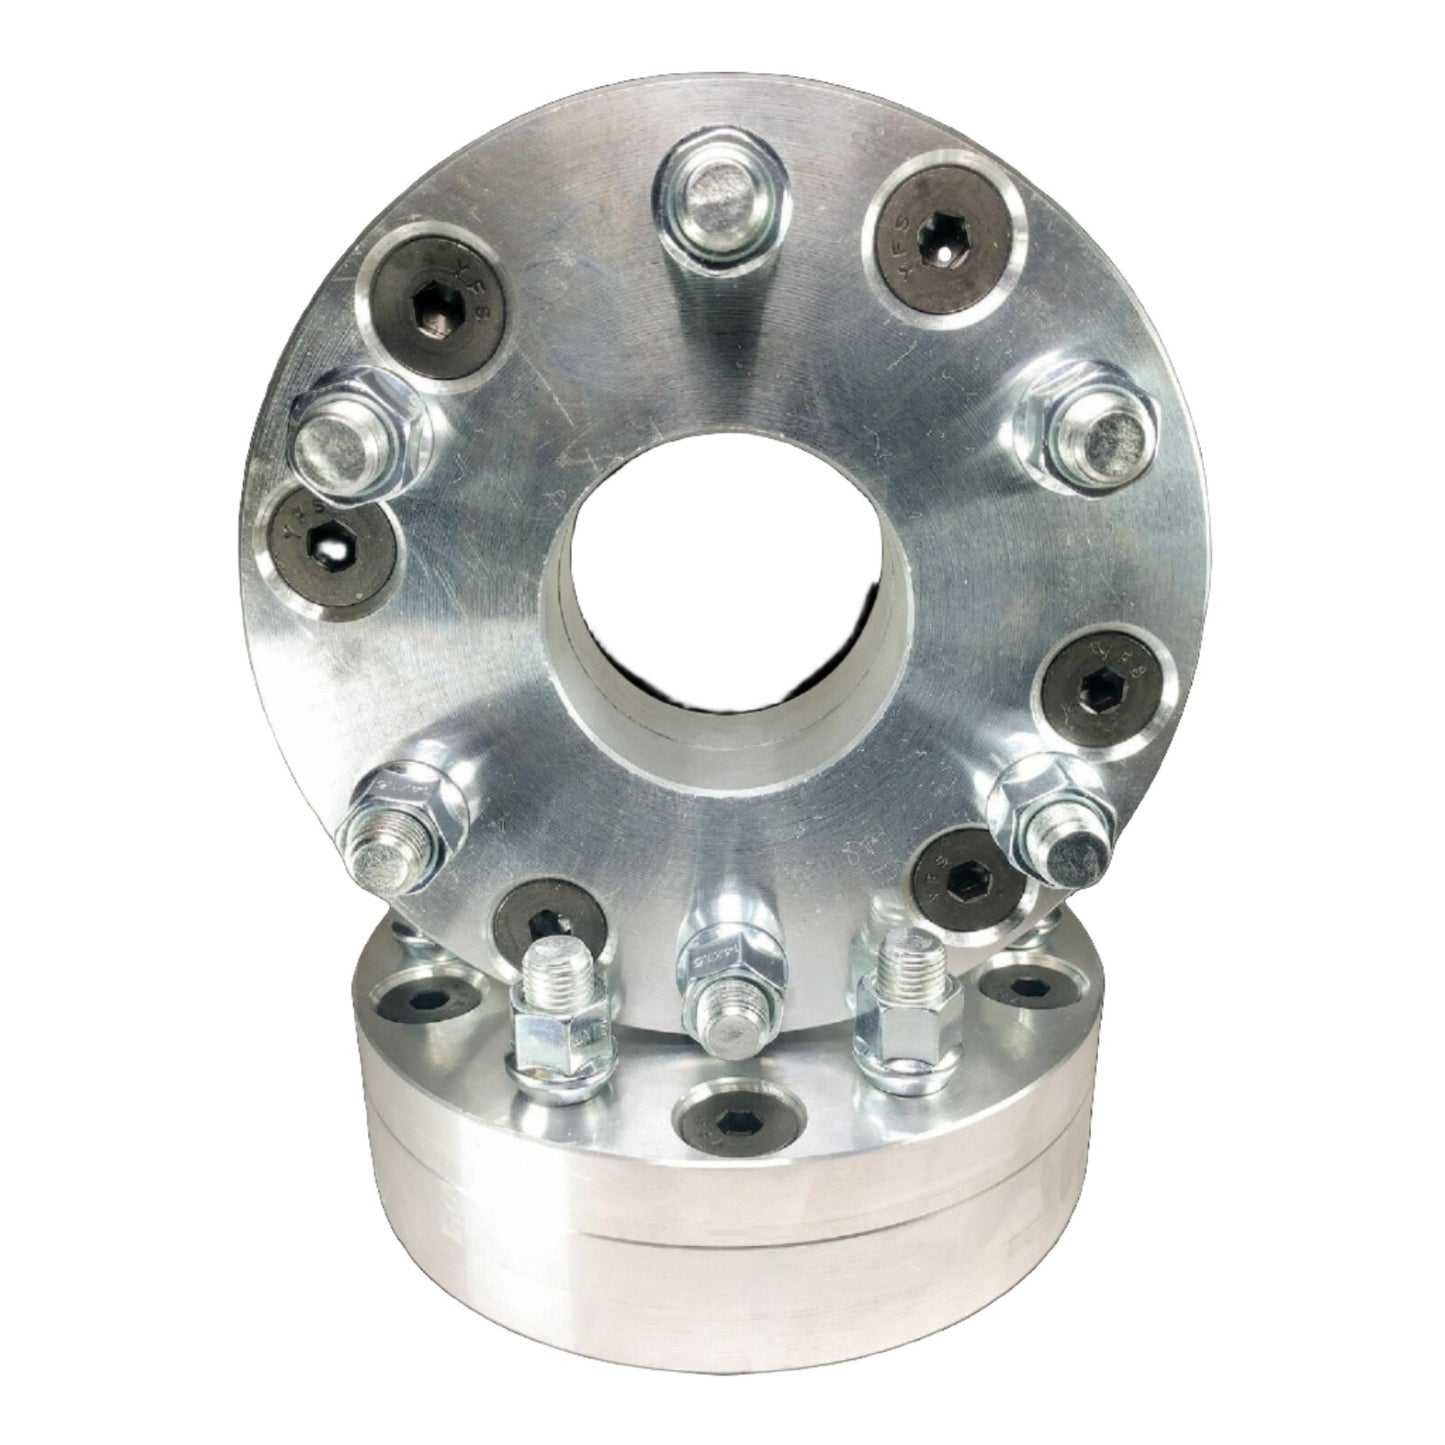 4x137 to 6x5.5" (6x139.7) 2 piece Wheel Adapter - Thickness: 1.5" - 3"